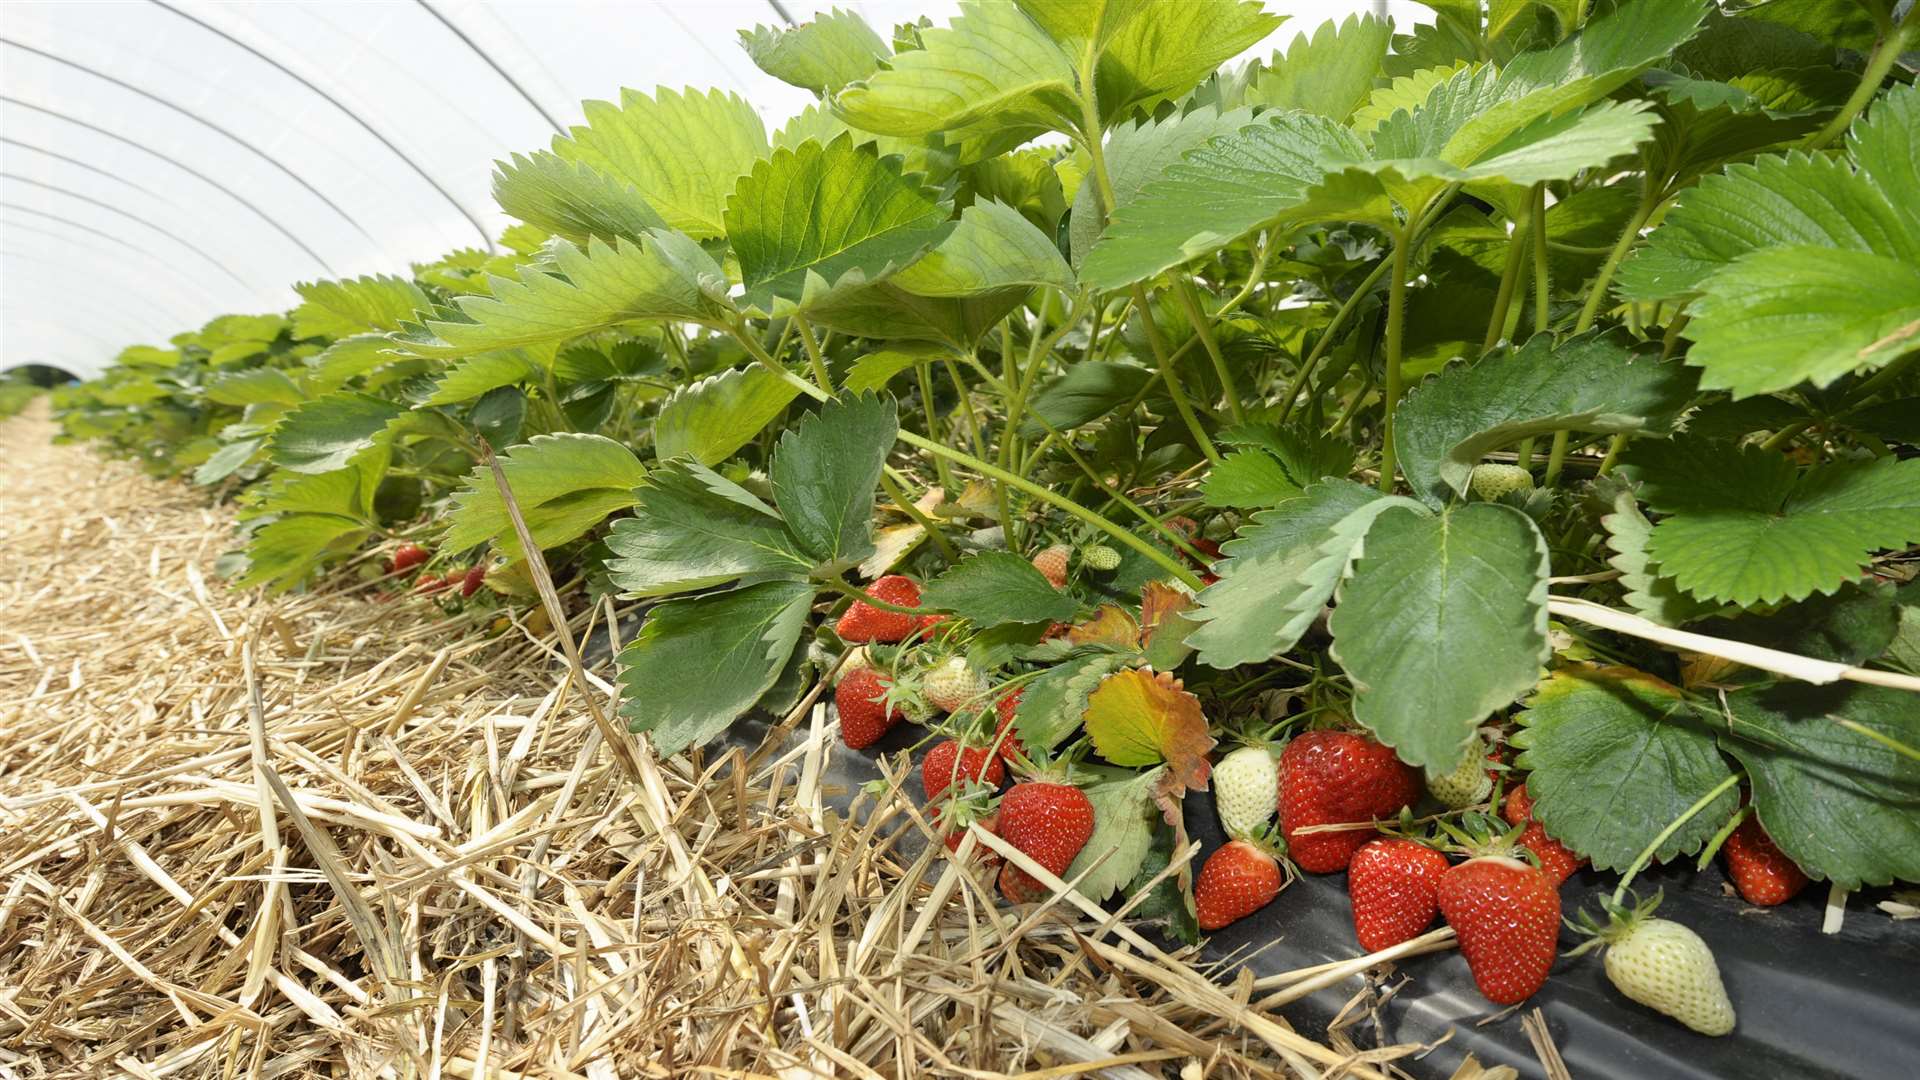 A mild winter and warm spring lead to a bumper crop of strawberries last year, enjoyed by farmers at Mockbeggar farm in Cliffe Woods